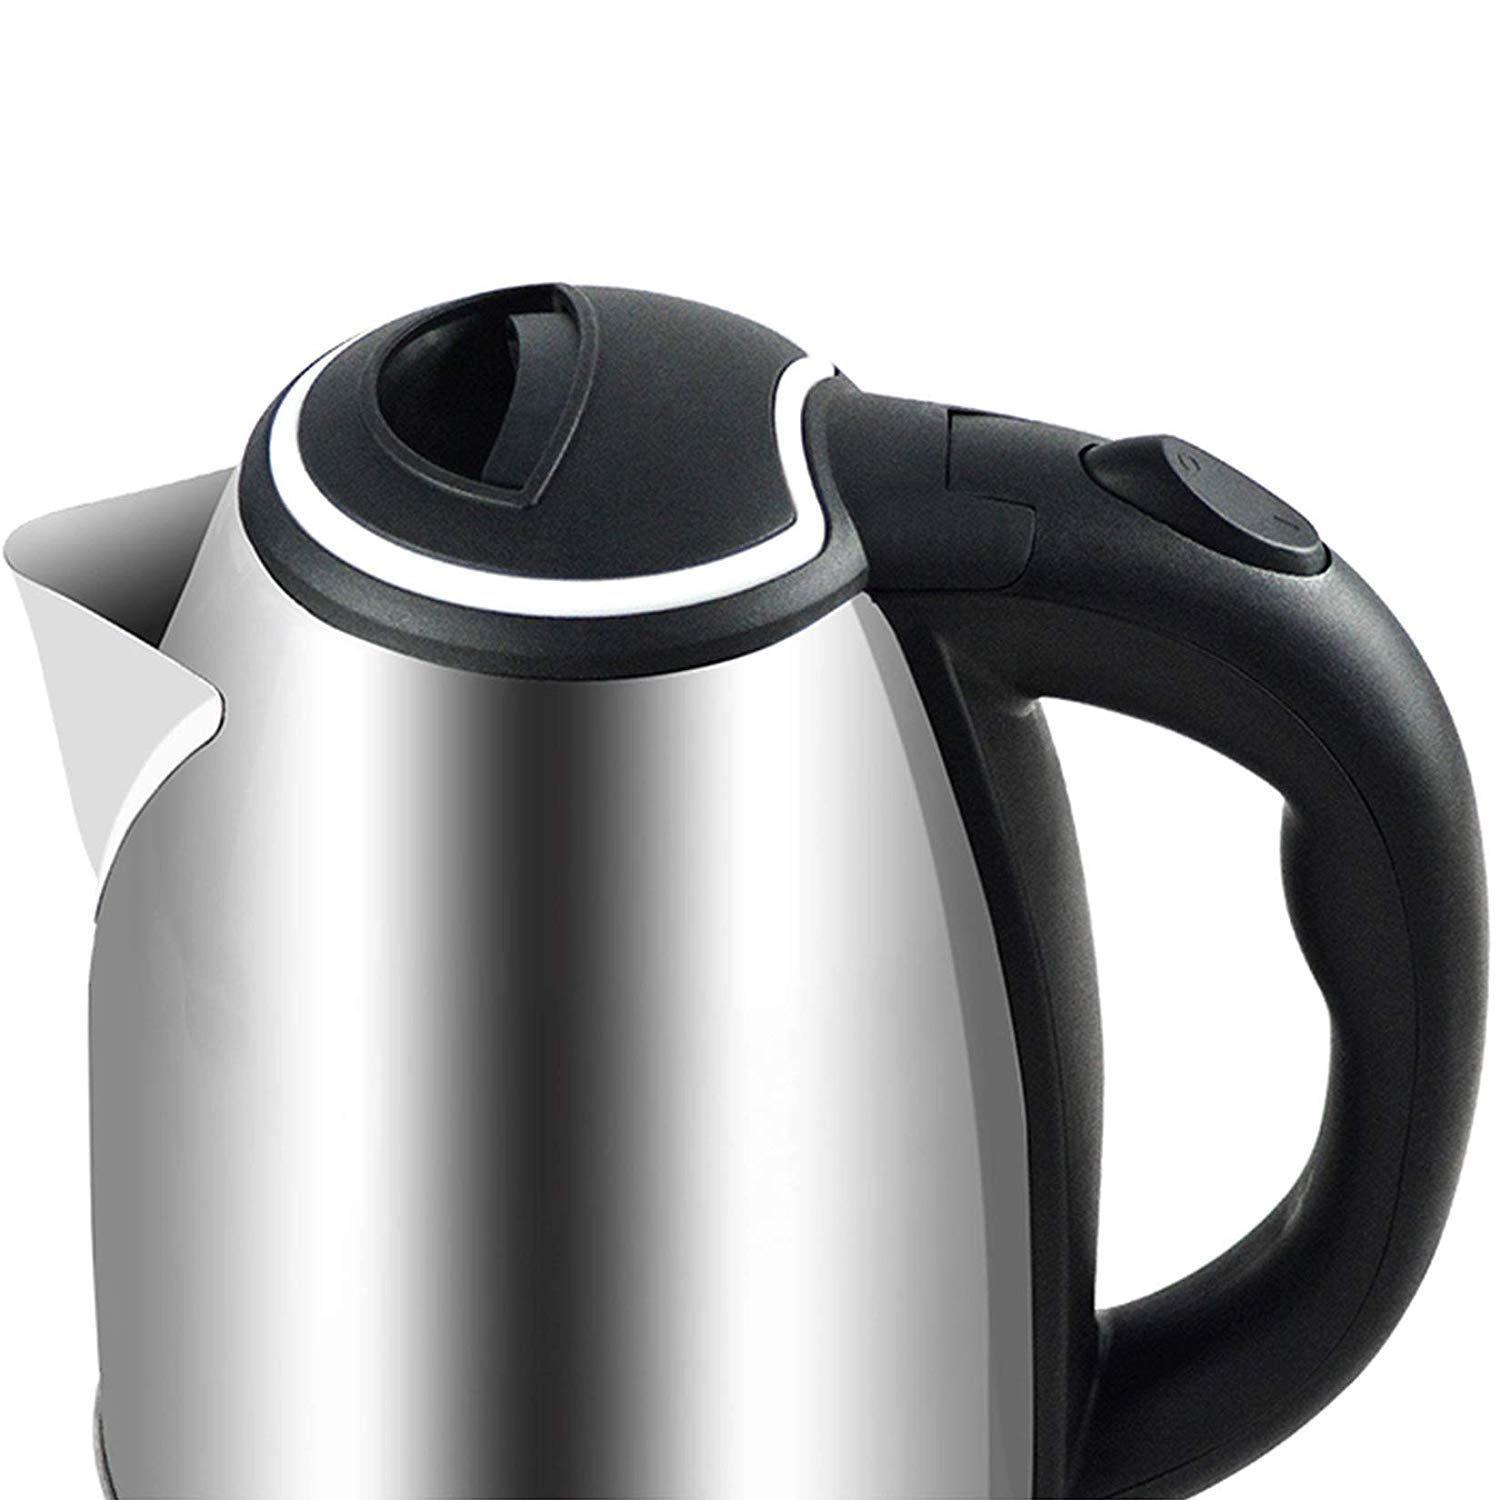 Electric kettle stainless steel for boiling water, noodles, soup, tea, upper view